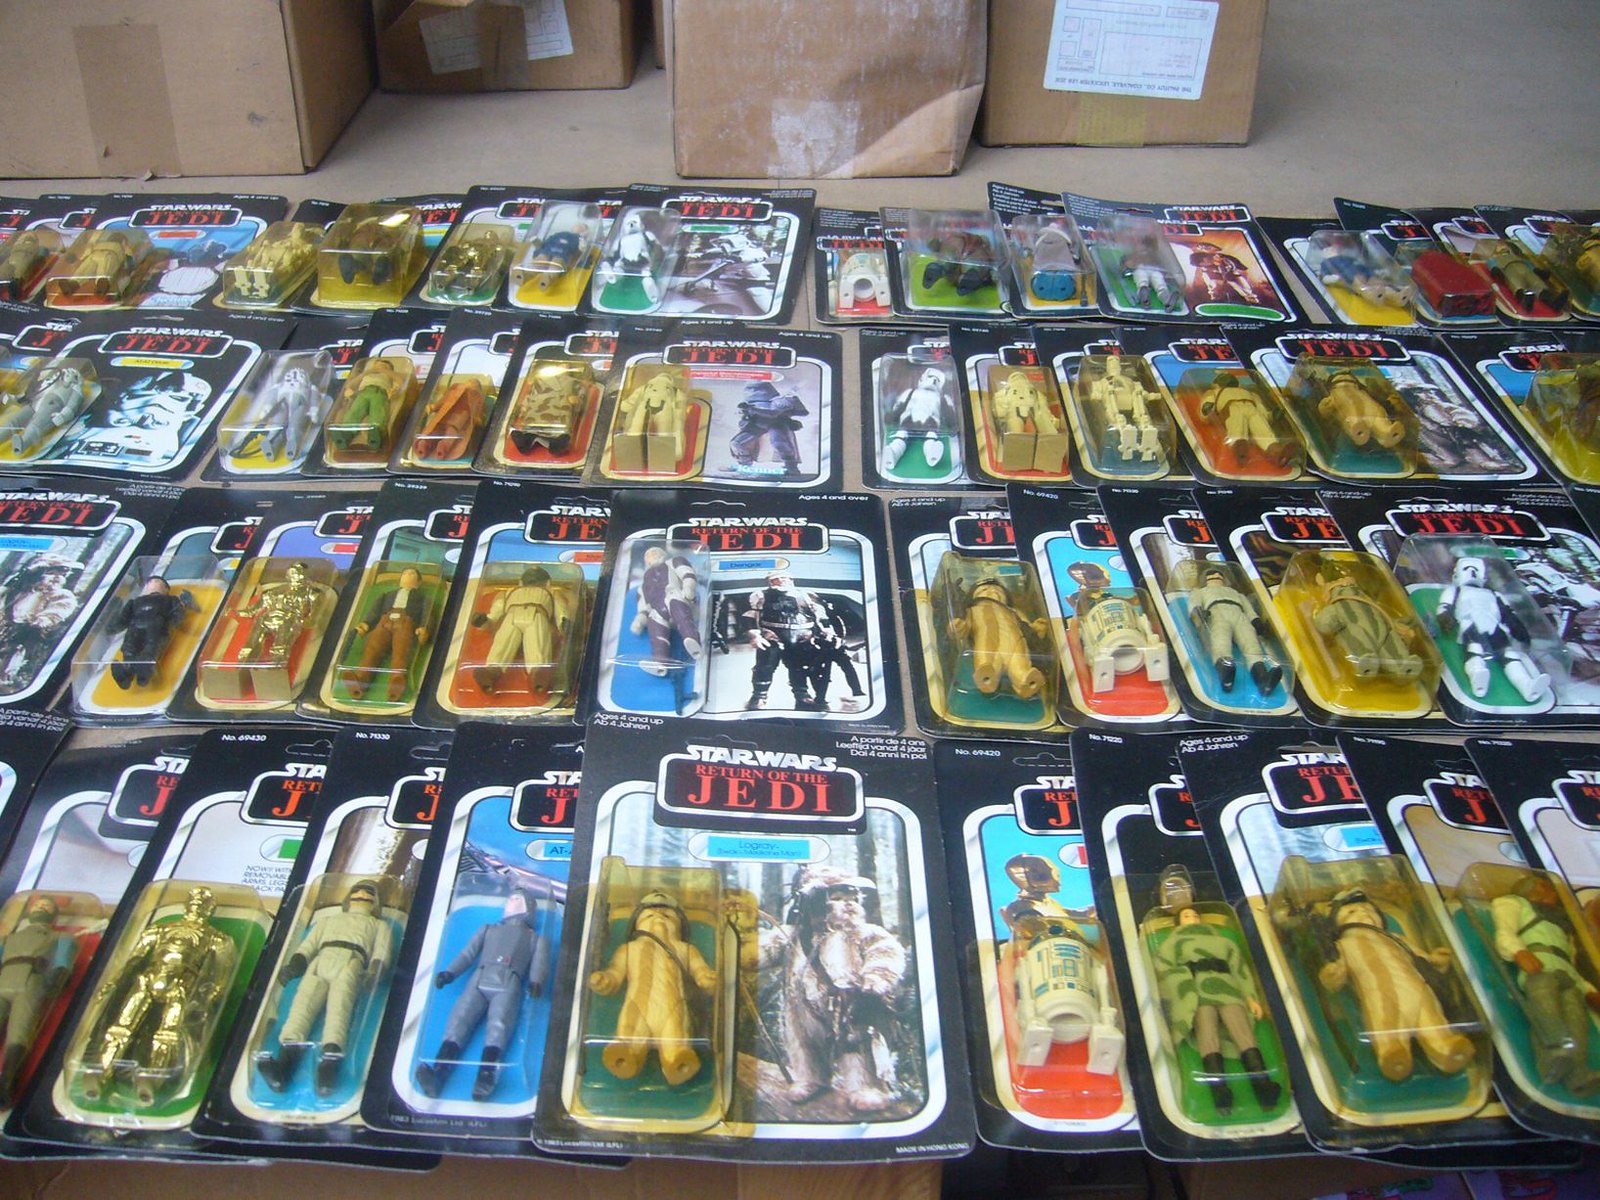 The Frank Beech retro toy shop - Star Wars Return of the Jedi action figures